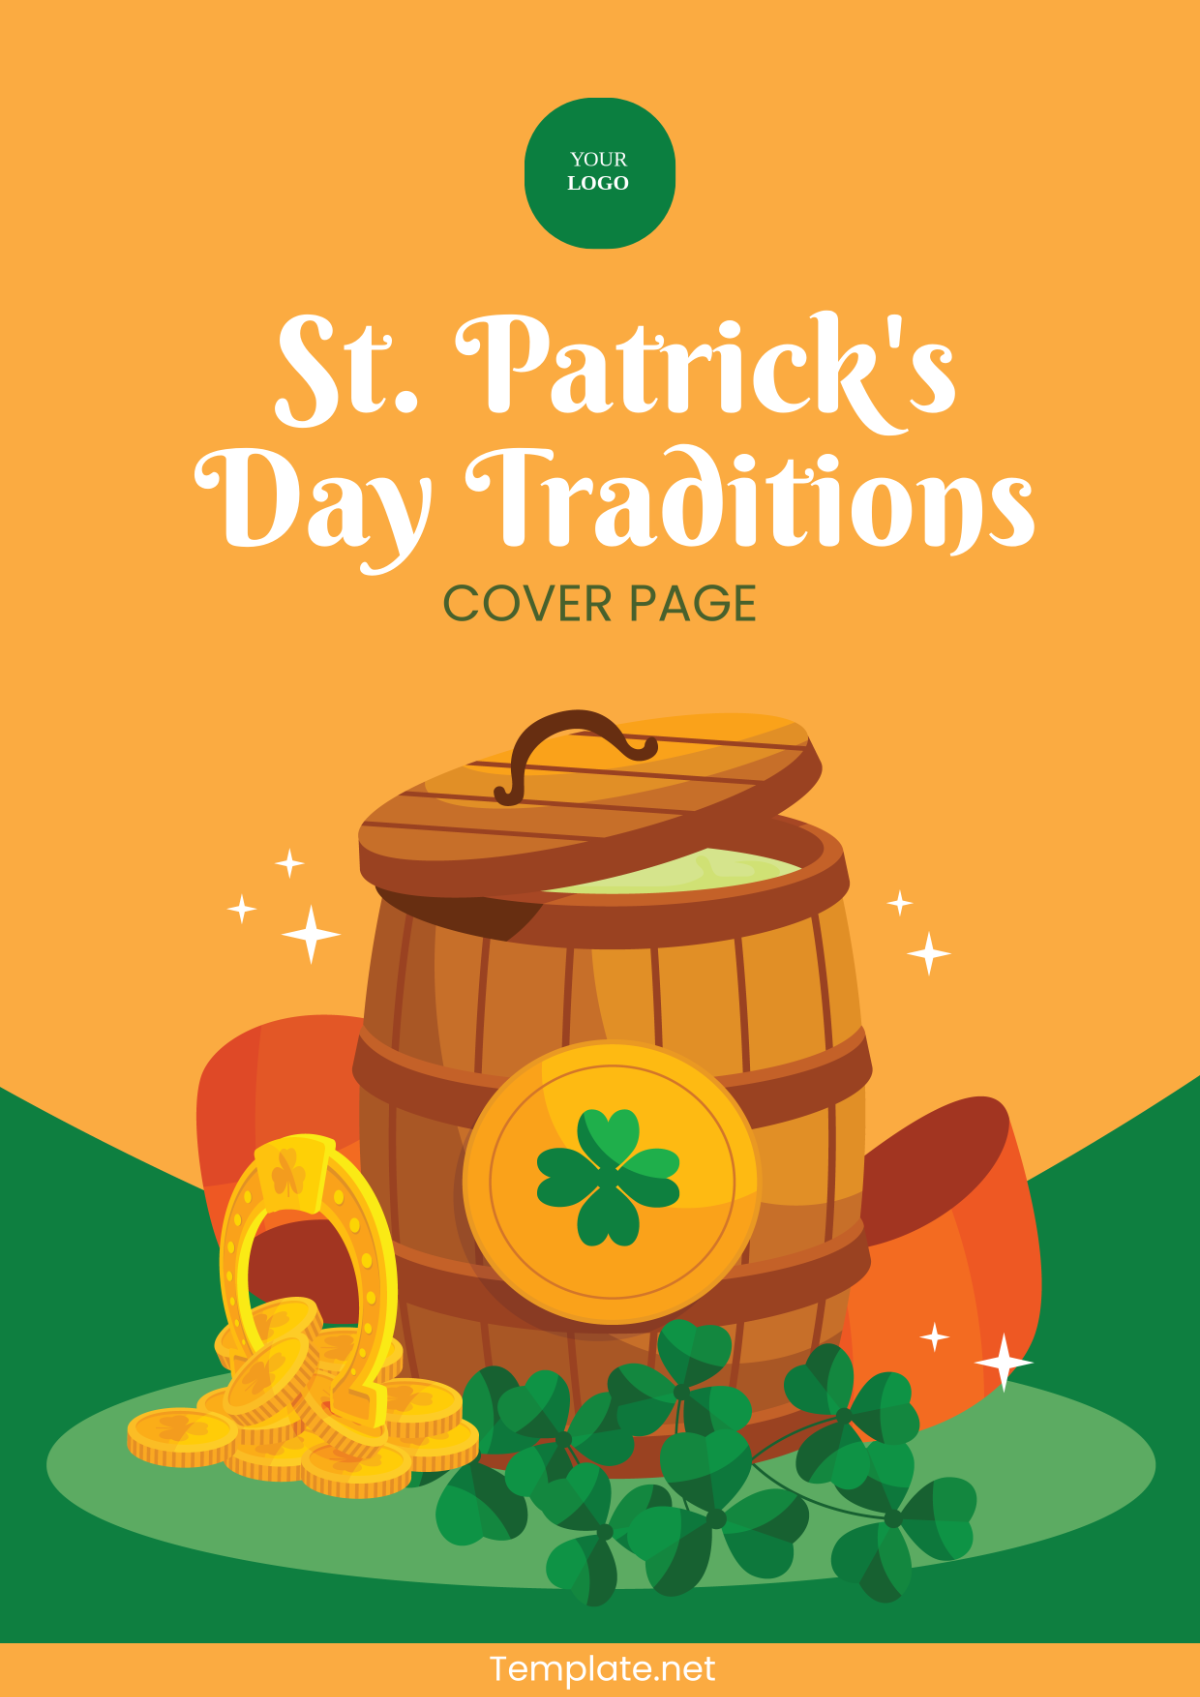 St. Patrick's Day Traditions Cover Page Template